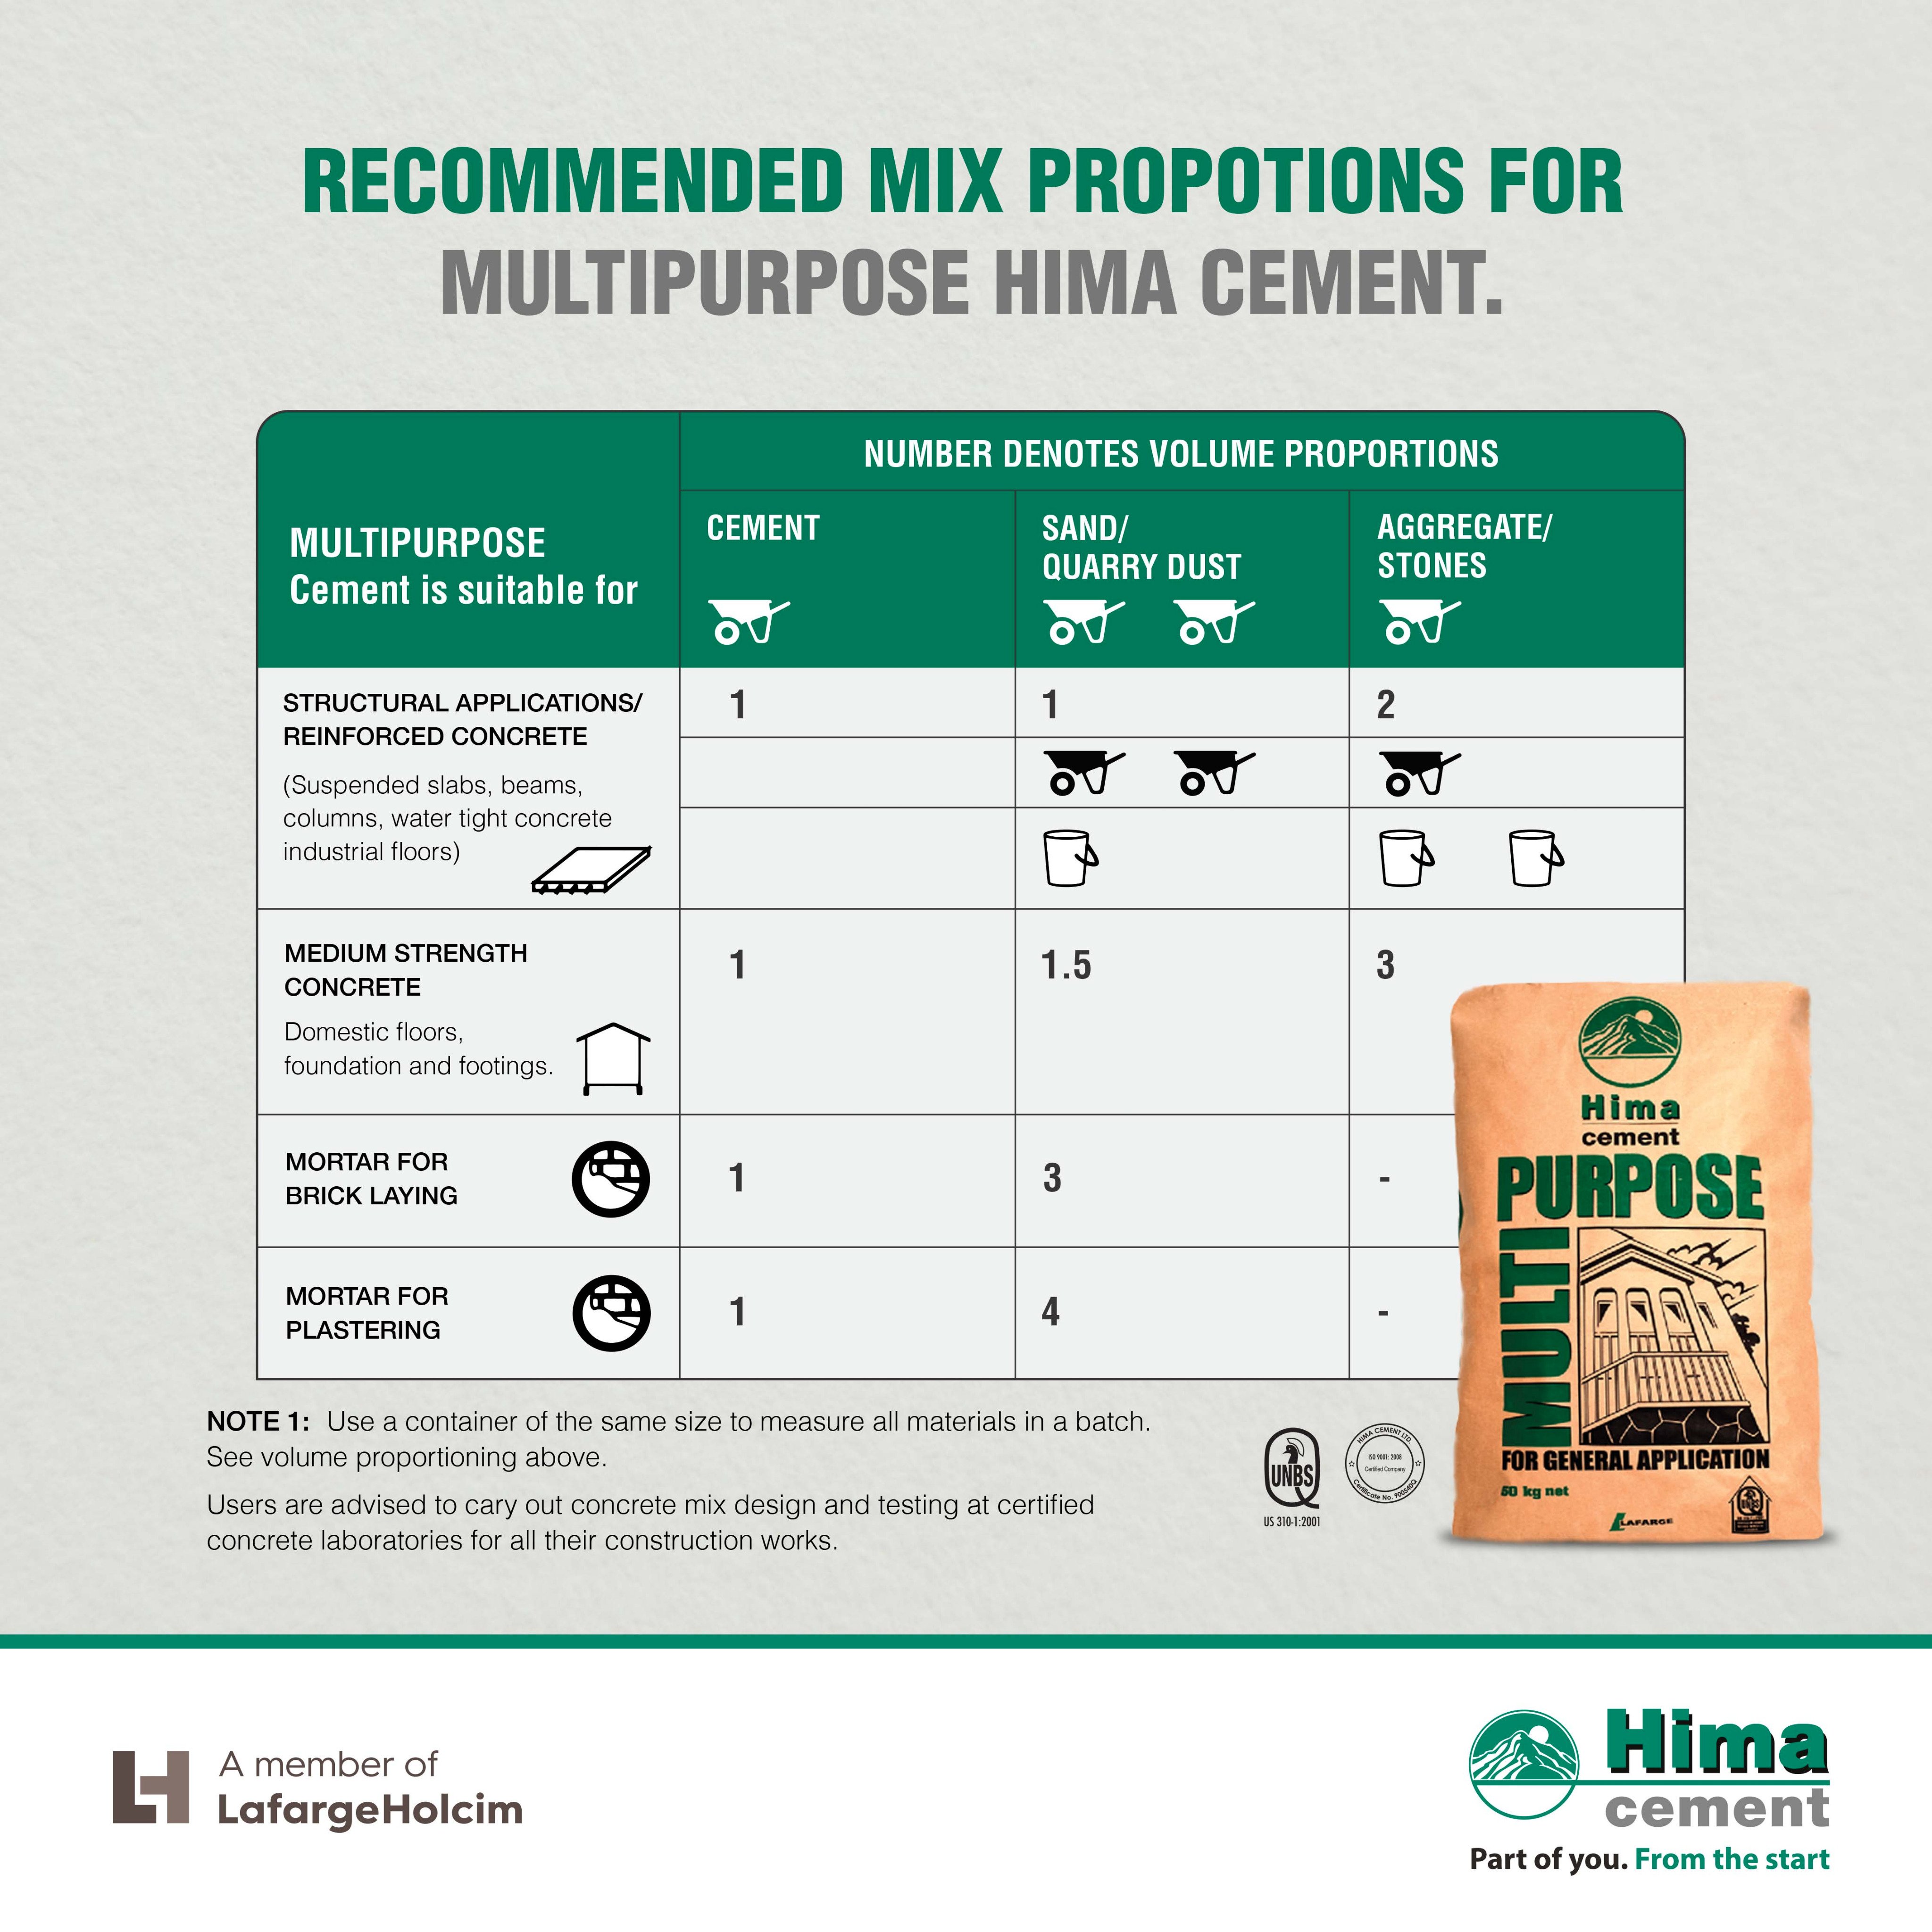 Lafarge Hima Cement on Twitter: "The right proportions of cement, water, sand and concrete mix ratios will give your building strength and durability for https://t.co/PCq1zxozjK" / Twitter